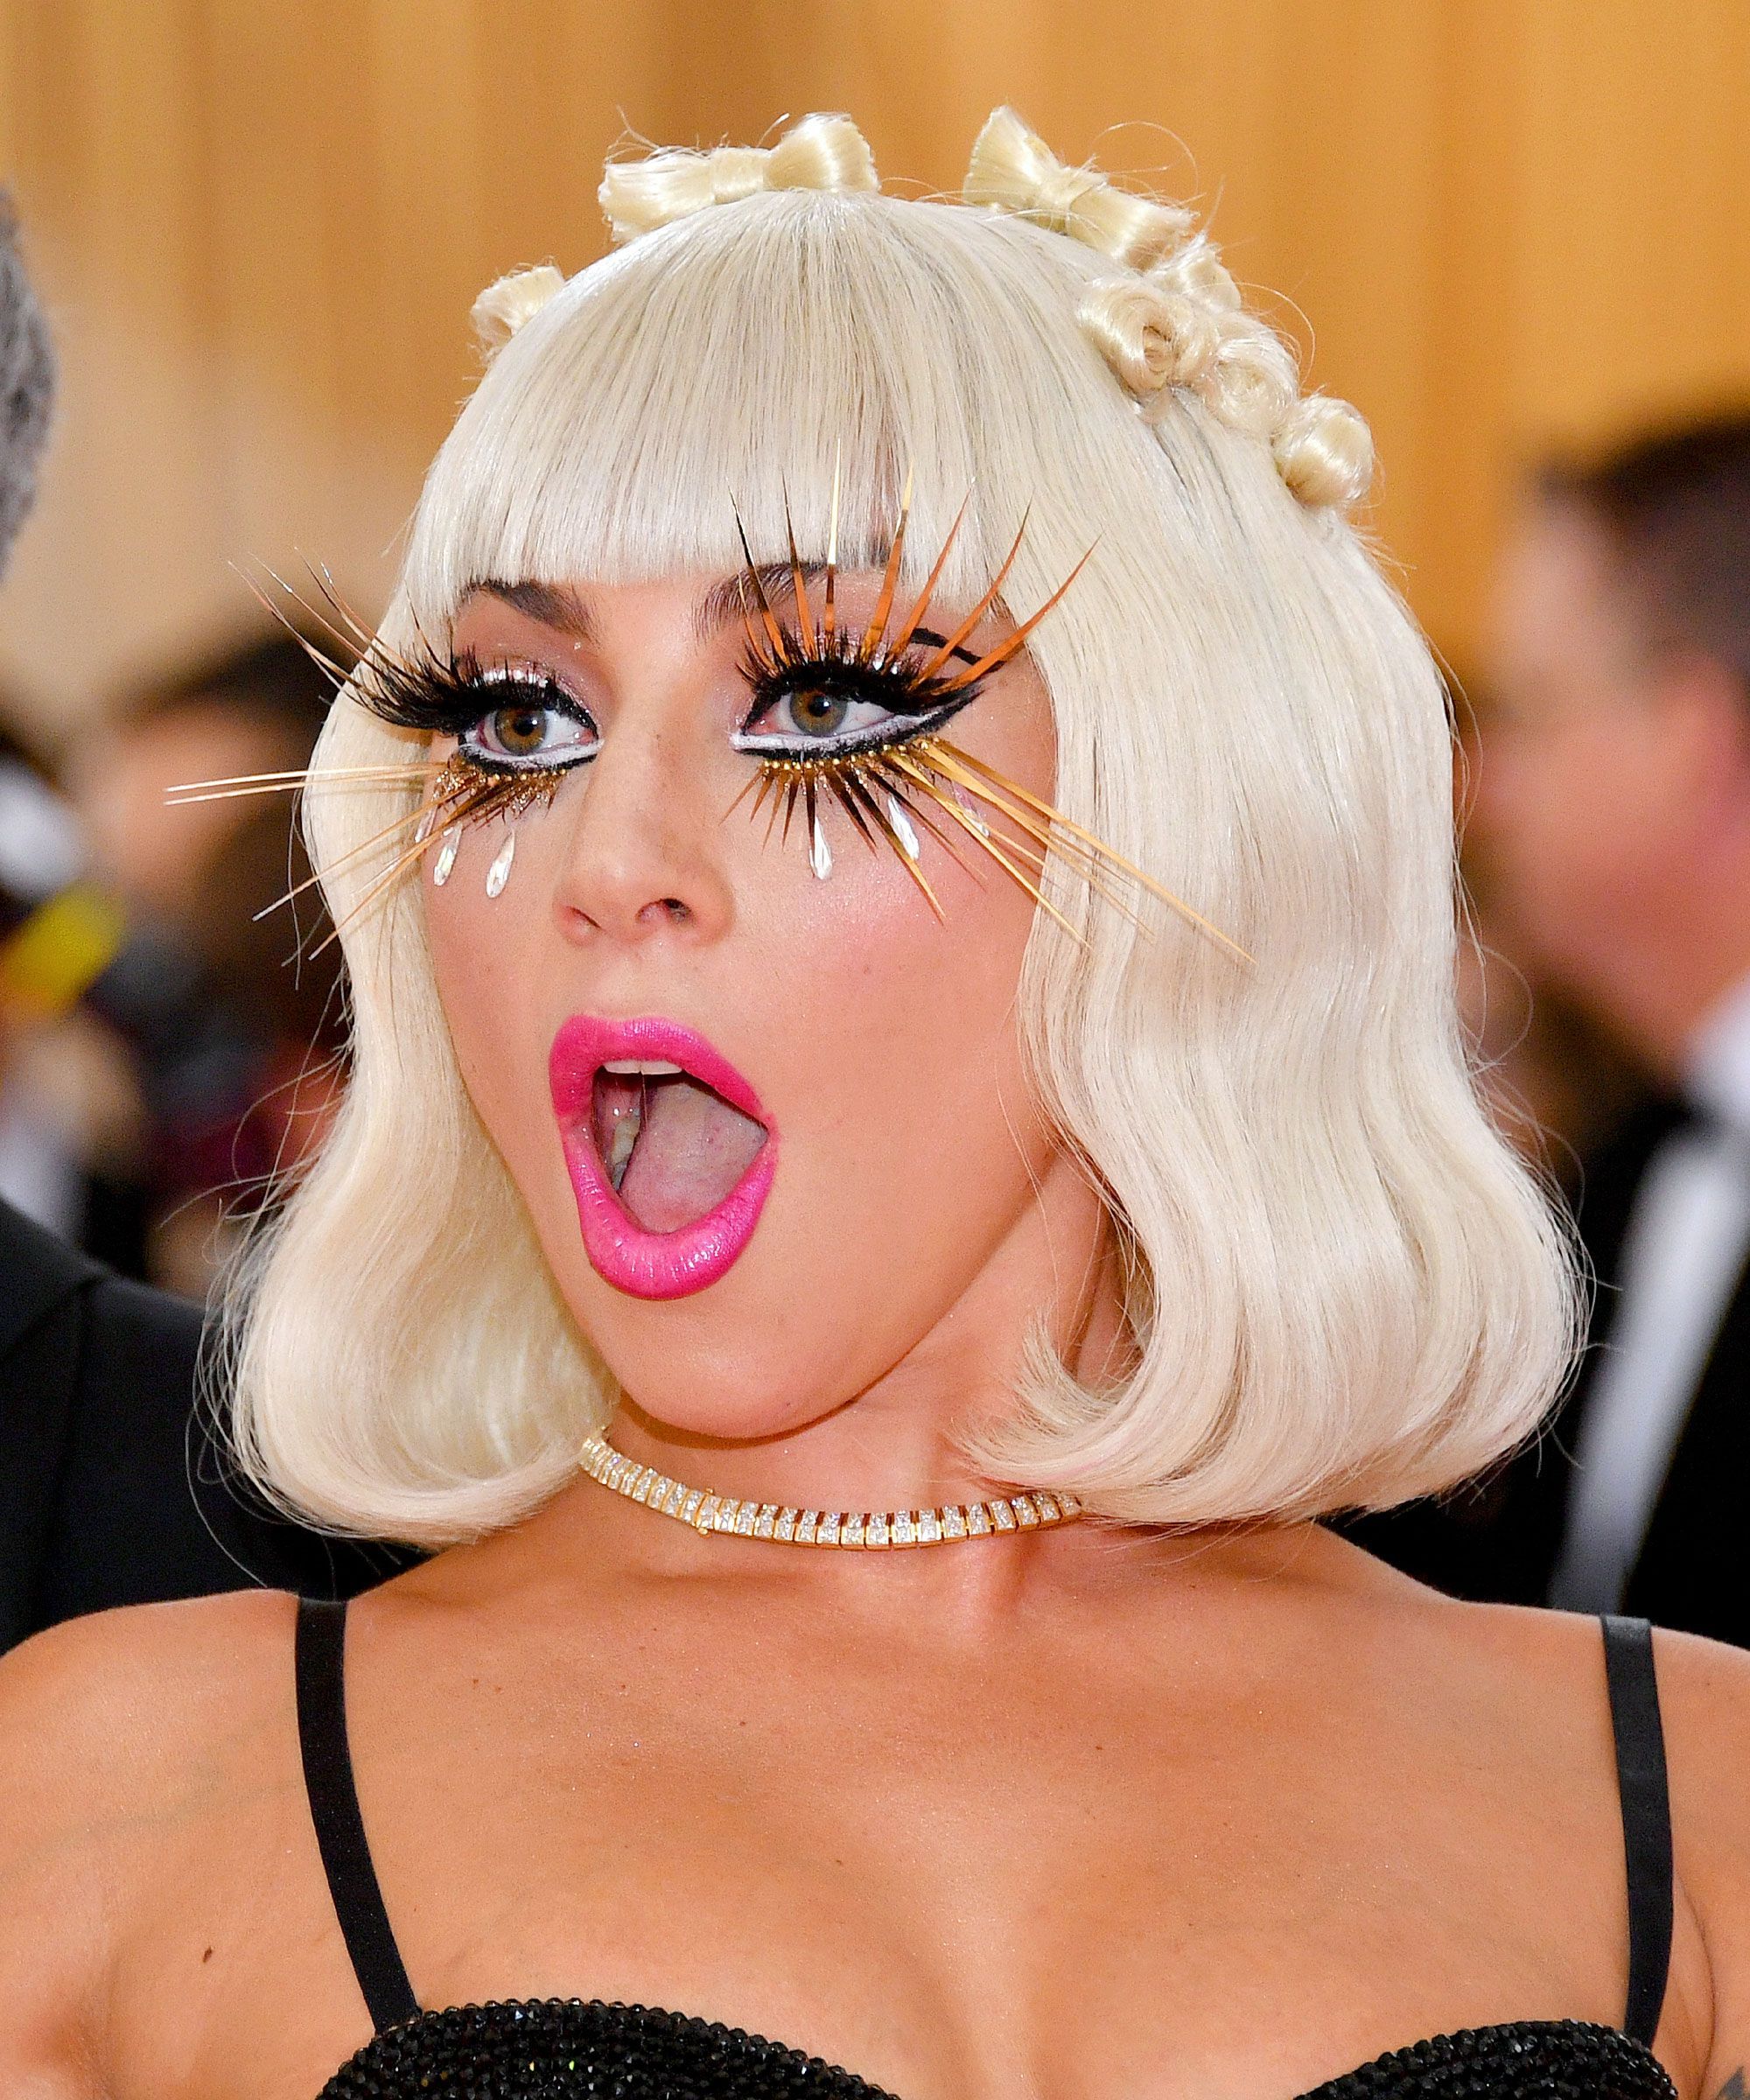 Lady Gaga Arrived At The Met Gala With The Wildest Fake Lashes We've Ever Seen